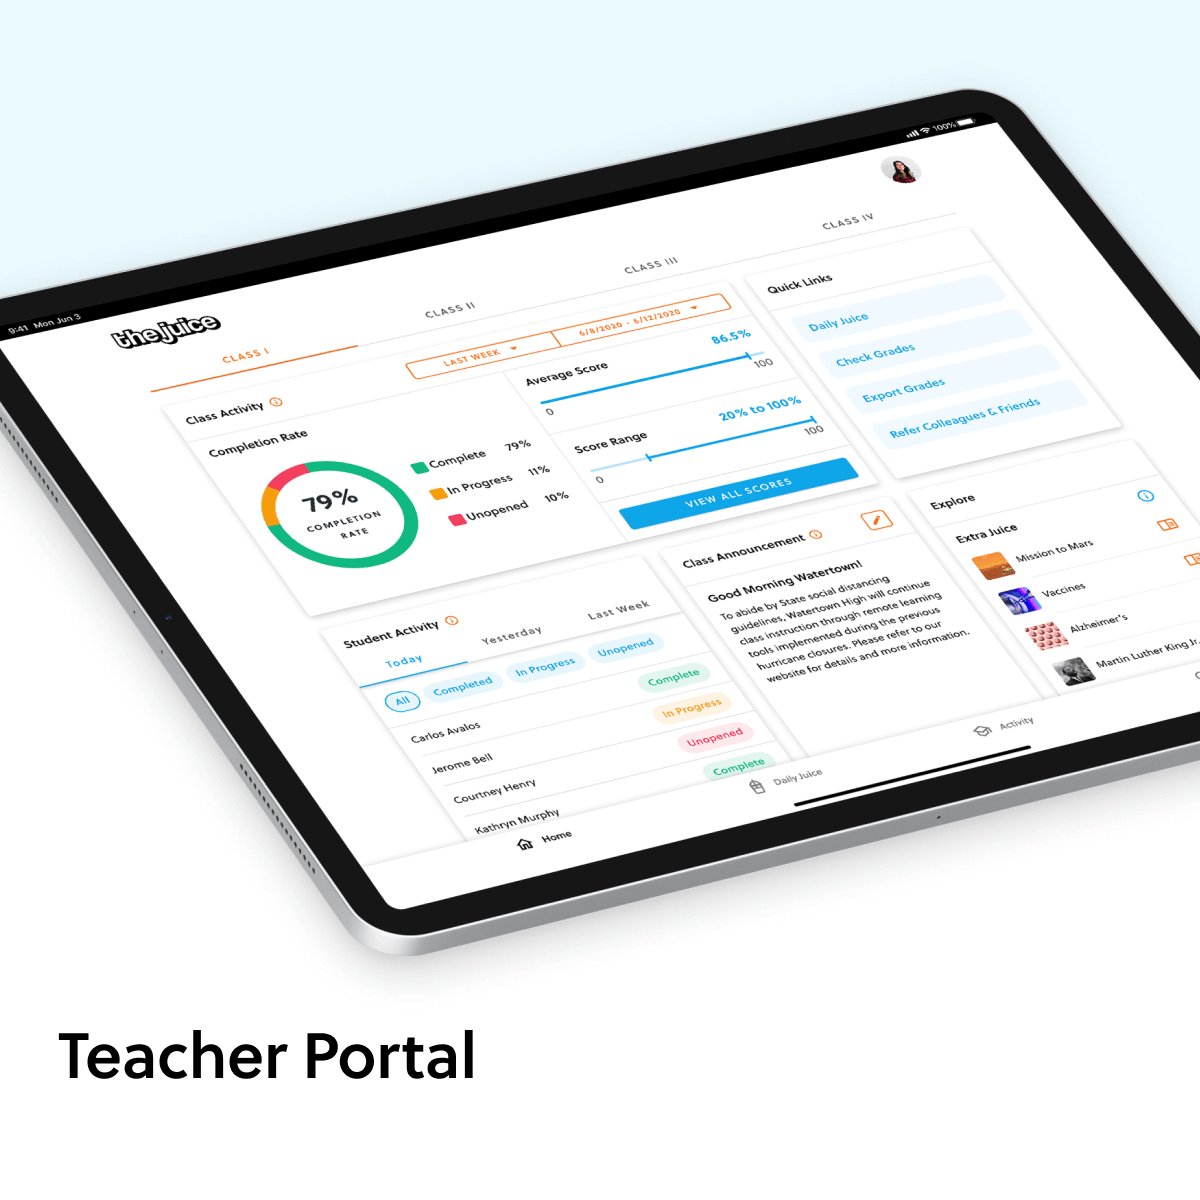 To meet your kids where they are, you need to know where they are. The teacher portal tracks individual and class progress towards standards mastery. It also provides real-time monitoring of student activity.